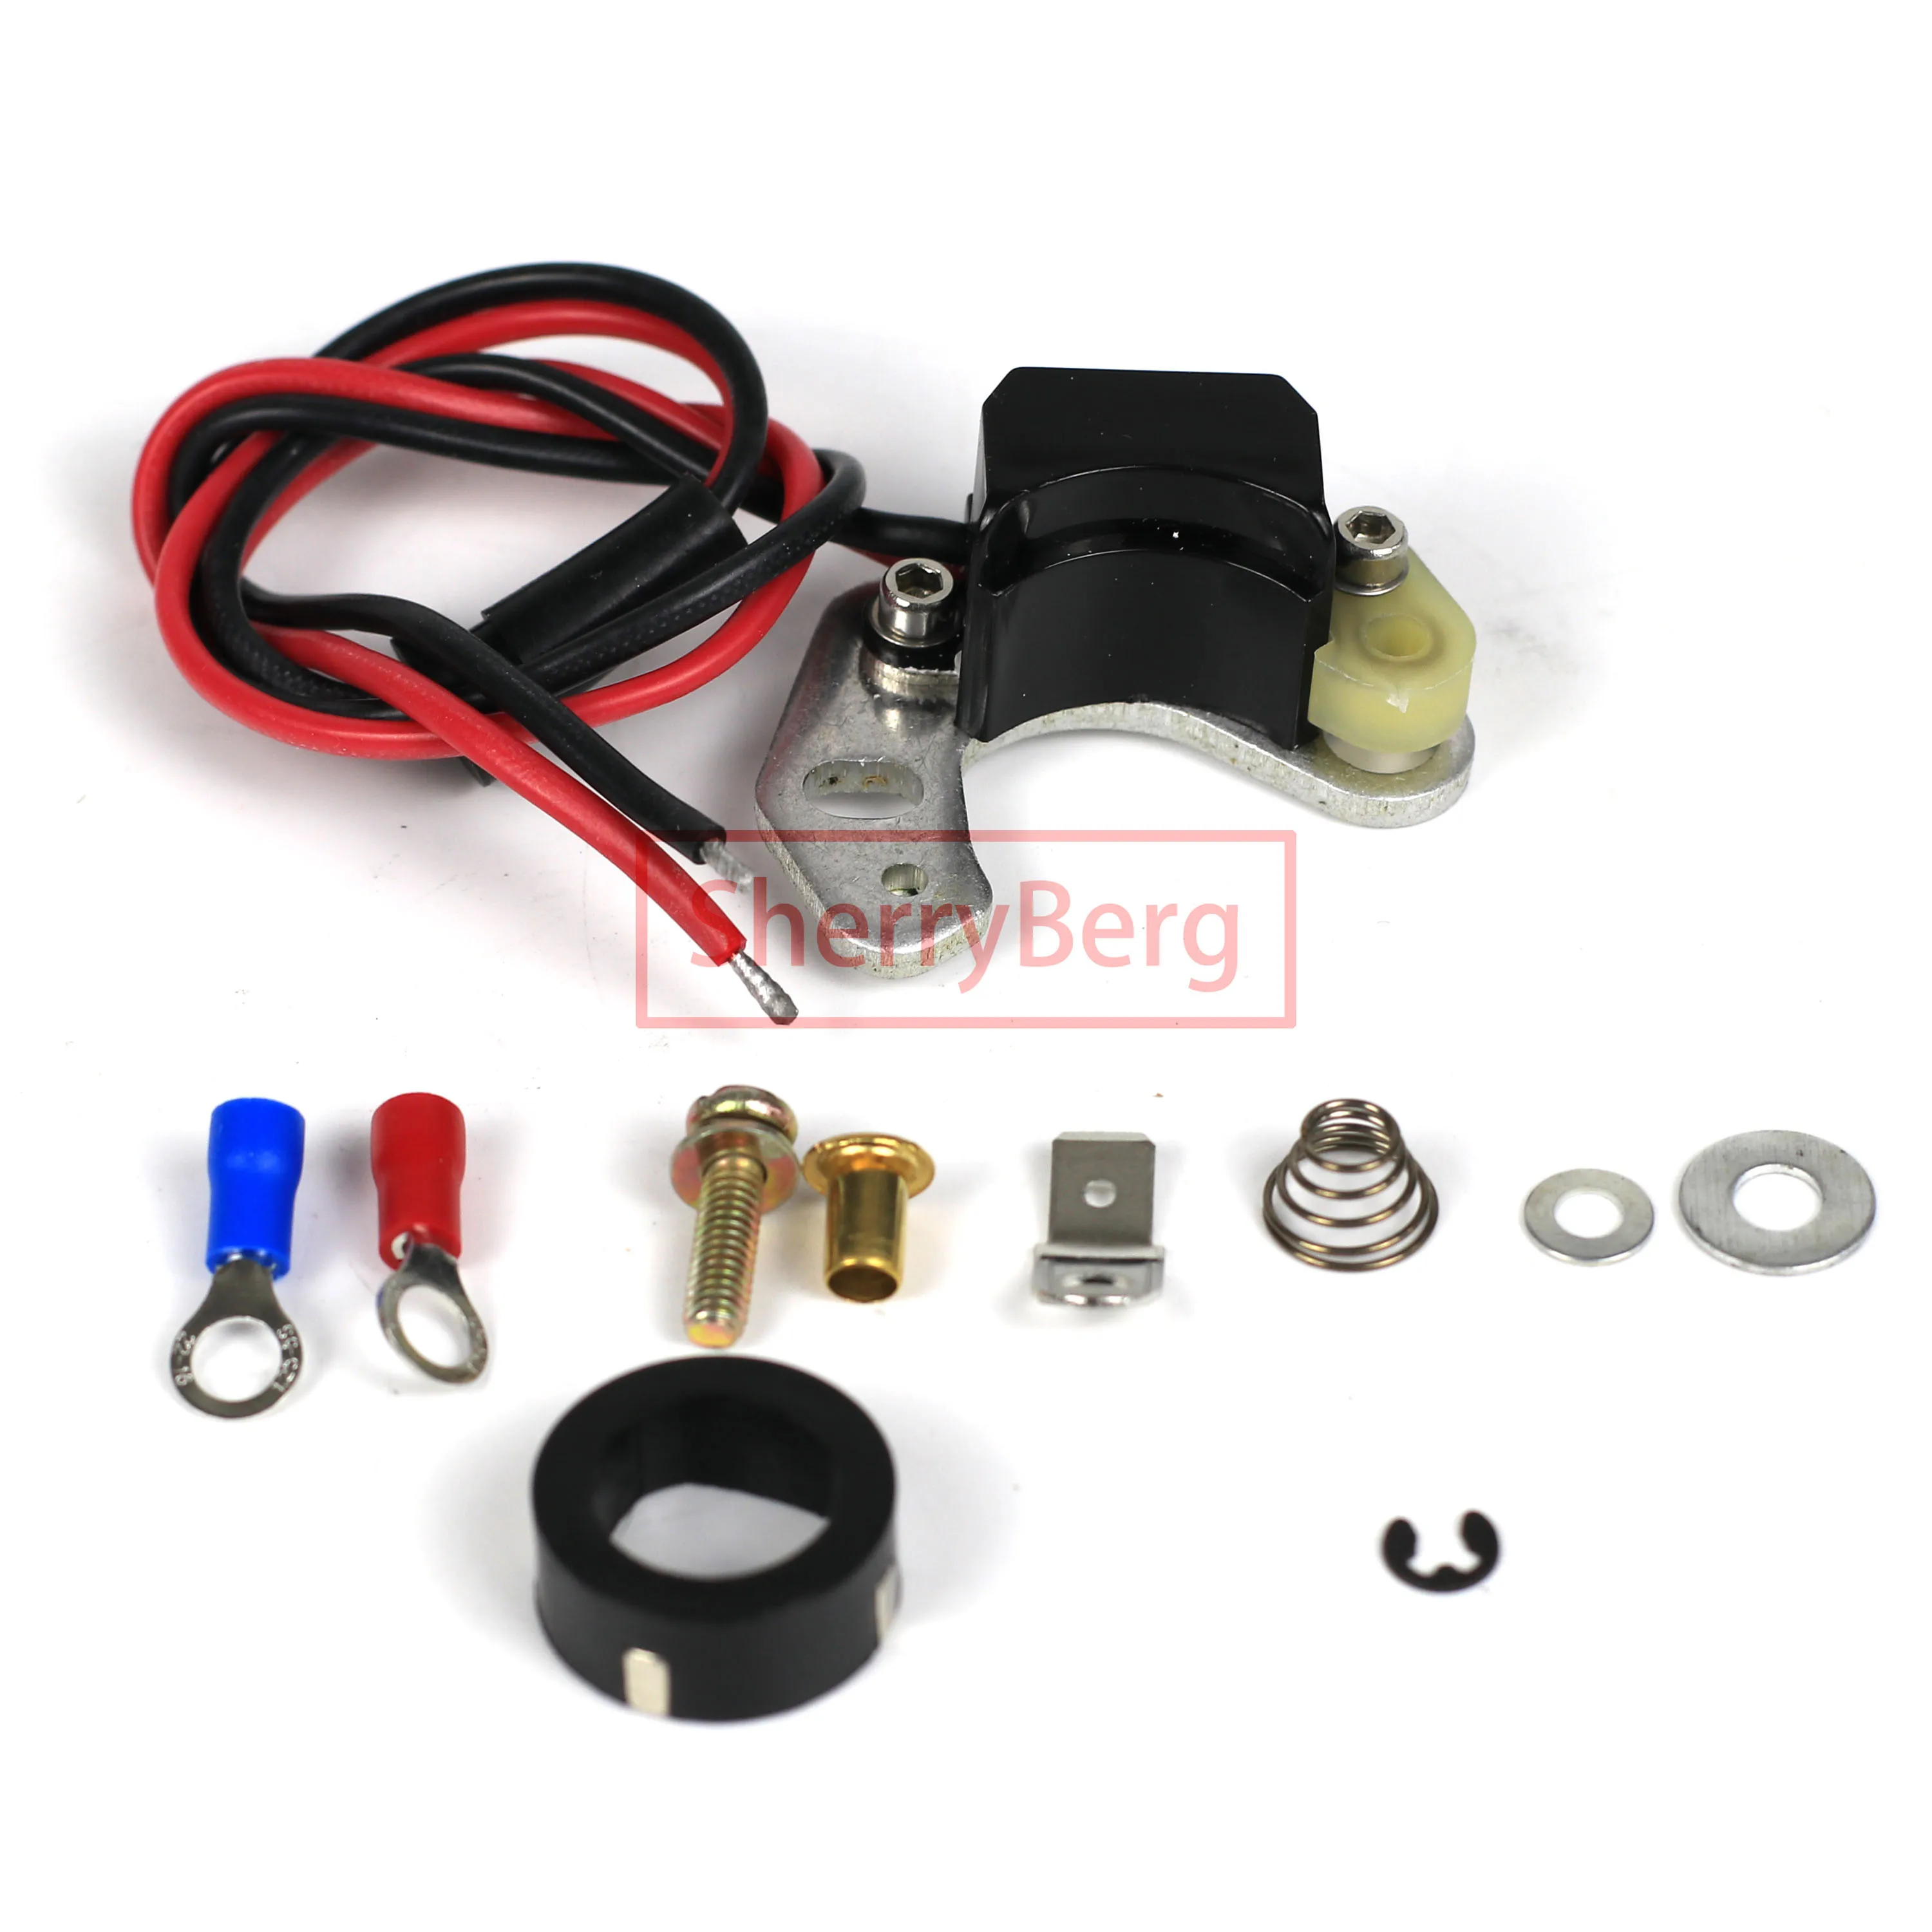 SherryBerg carb fit for Sachs Hercules 504 / 505 Vergaser Bing